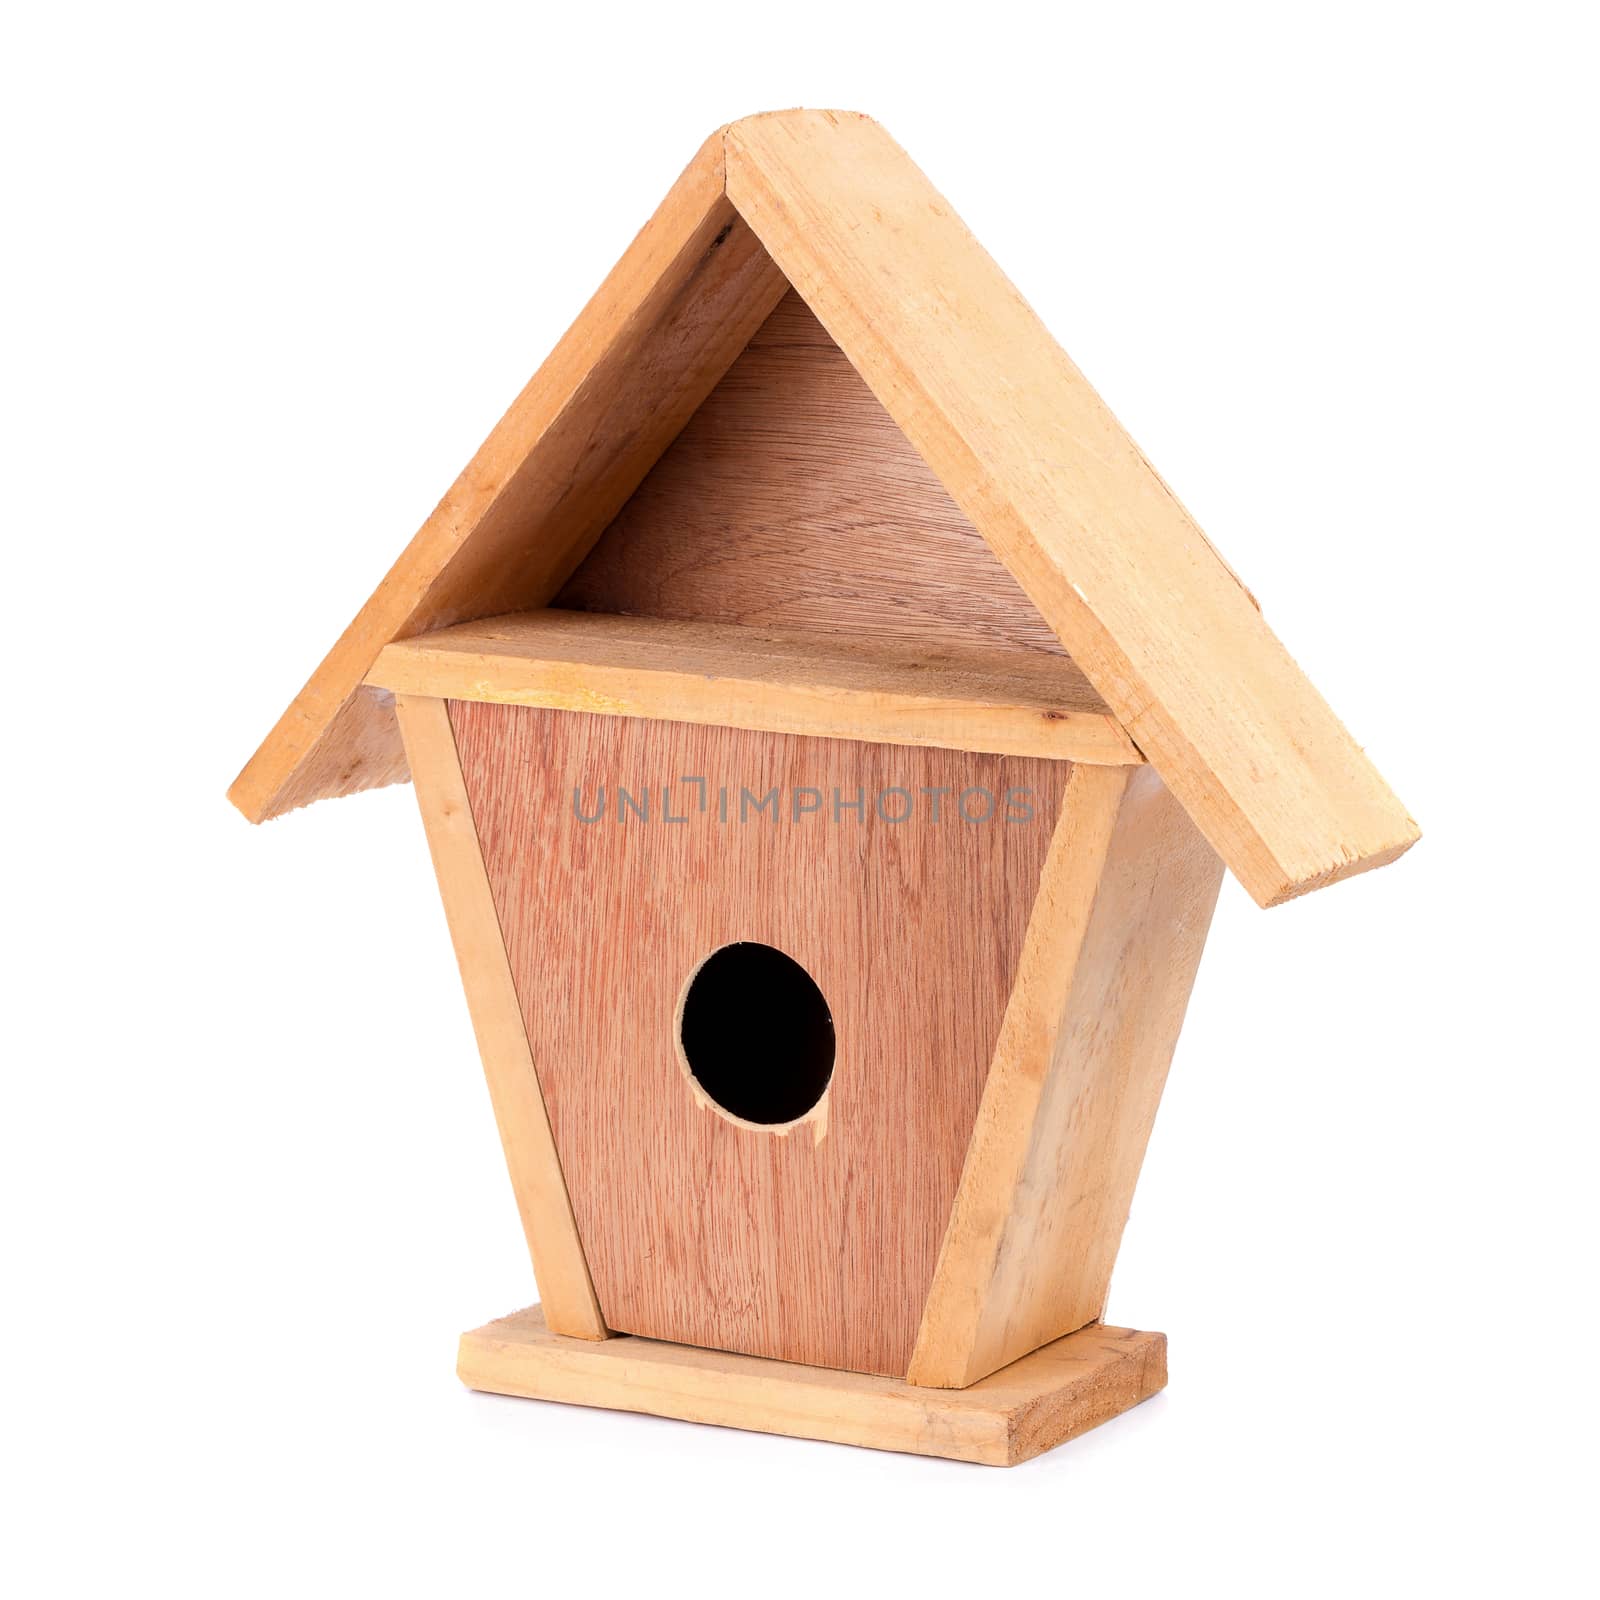 Wooden Bird House Isolated on White background.